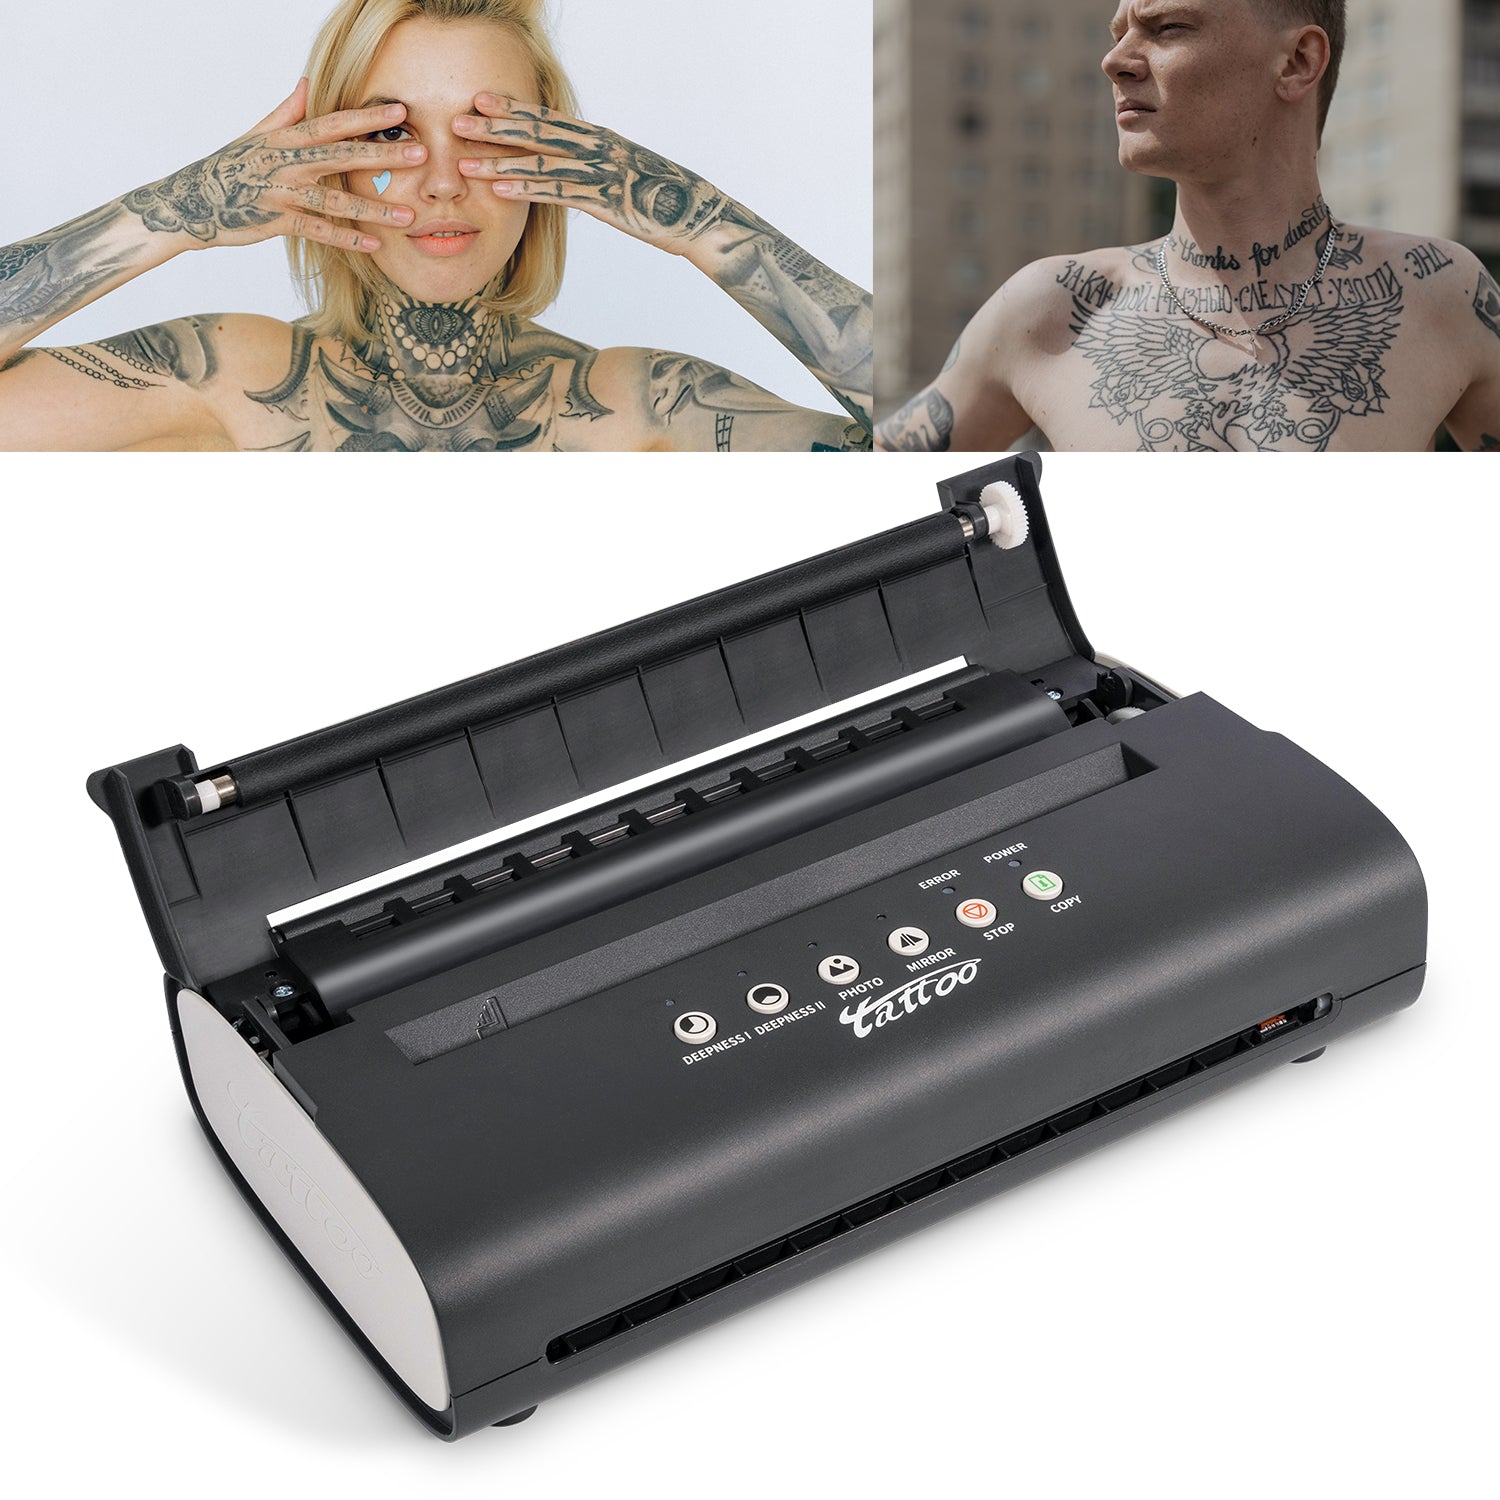 Can anyone shed some insight into purchasing a tattoo printer? These are  all listed as different brands but look identical. Why? I know I need a  thermal copier but there's so much